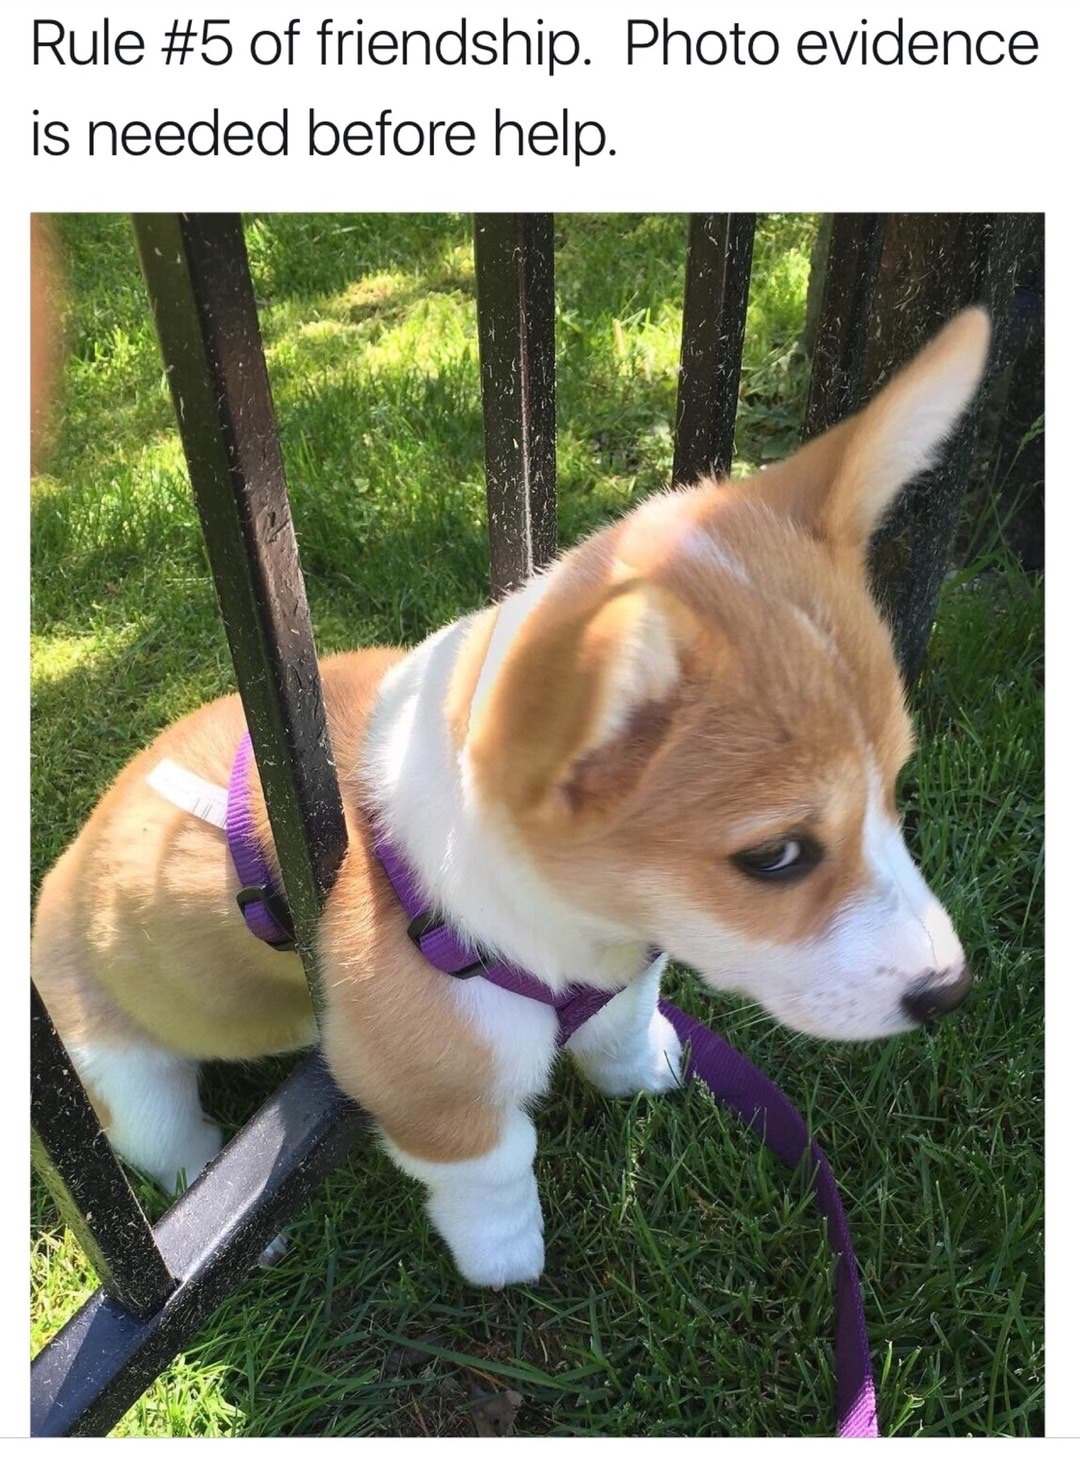 corgi stuck in fence meme - Rule of friendship. Photo evidence is needed before help.